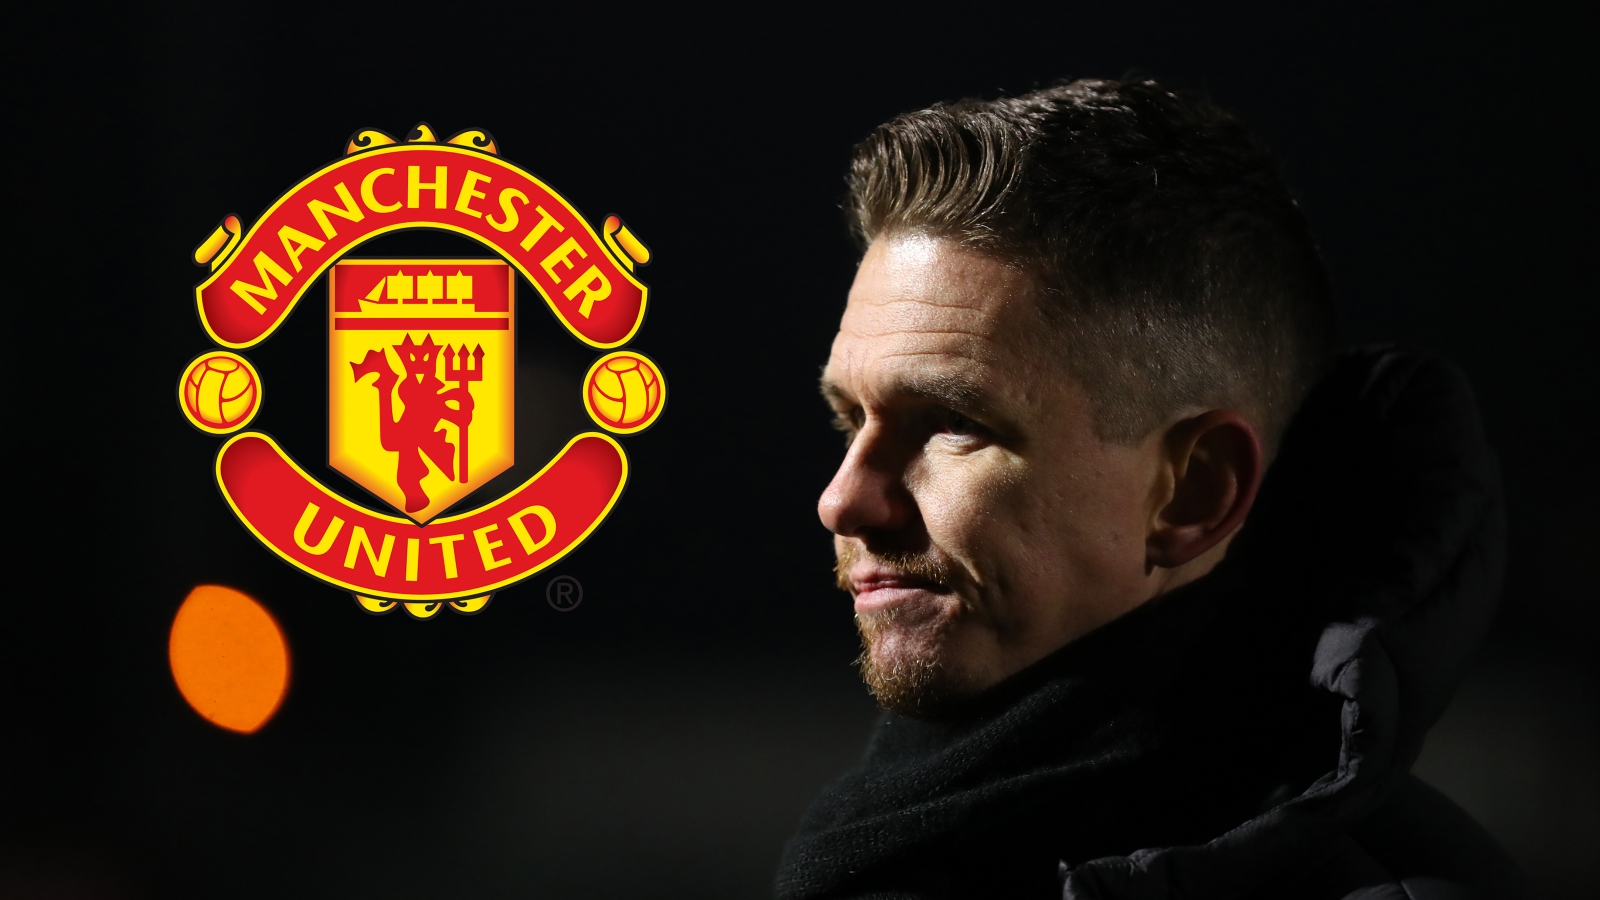 Manchester United appoint Marc Skinner as new head coach after Orlando Pride departure